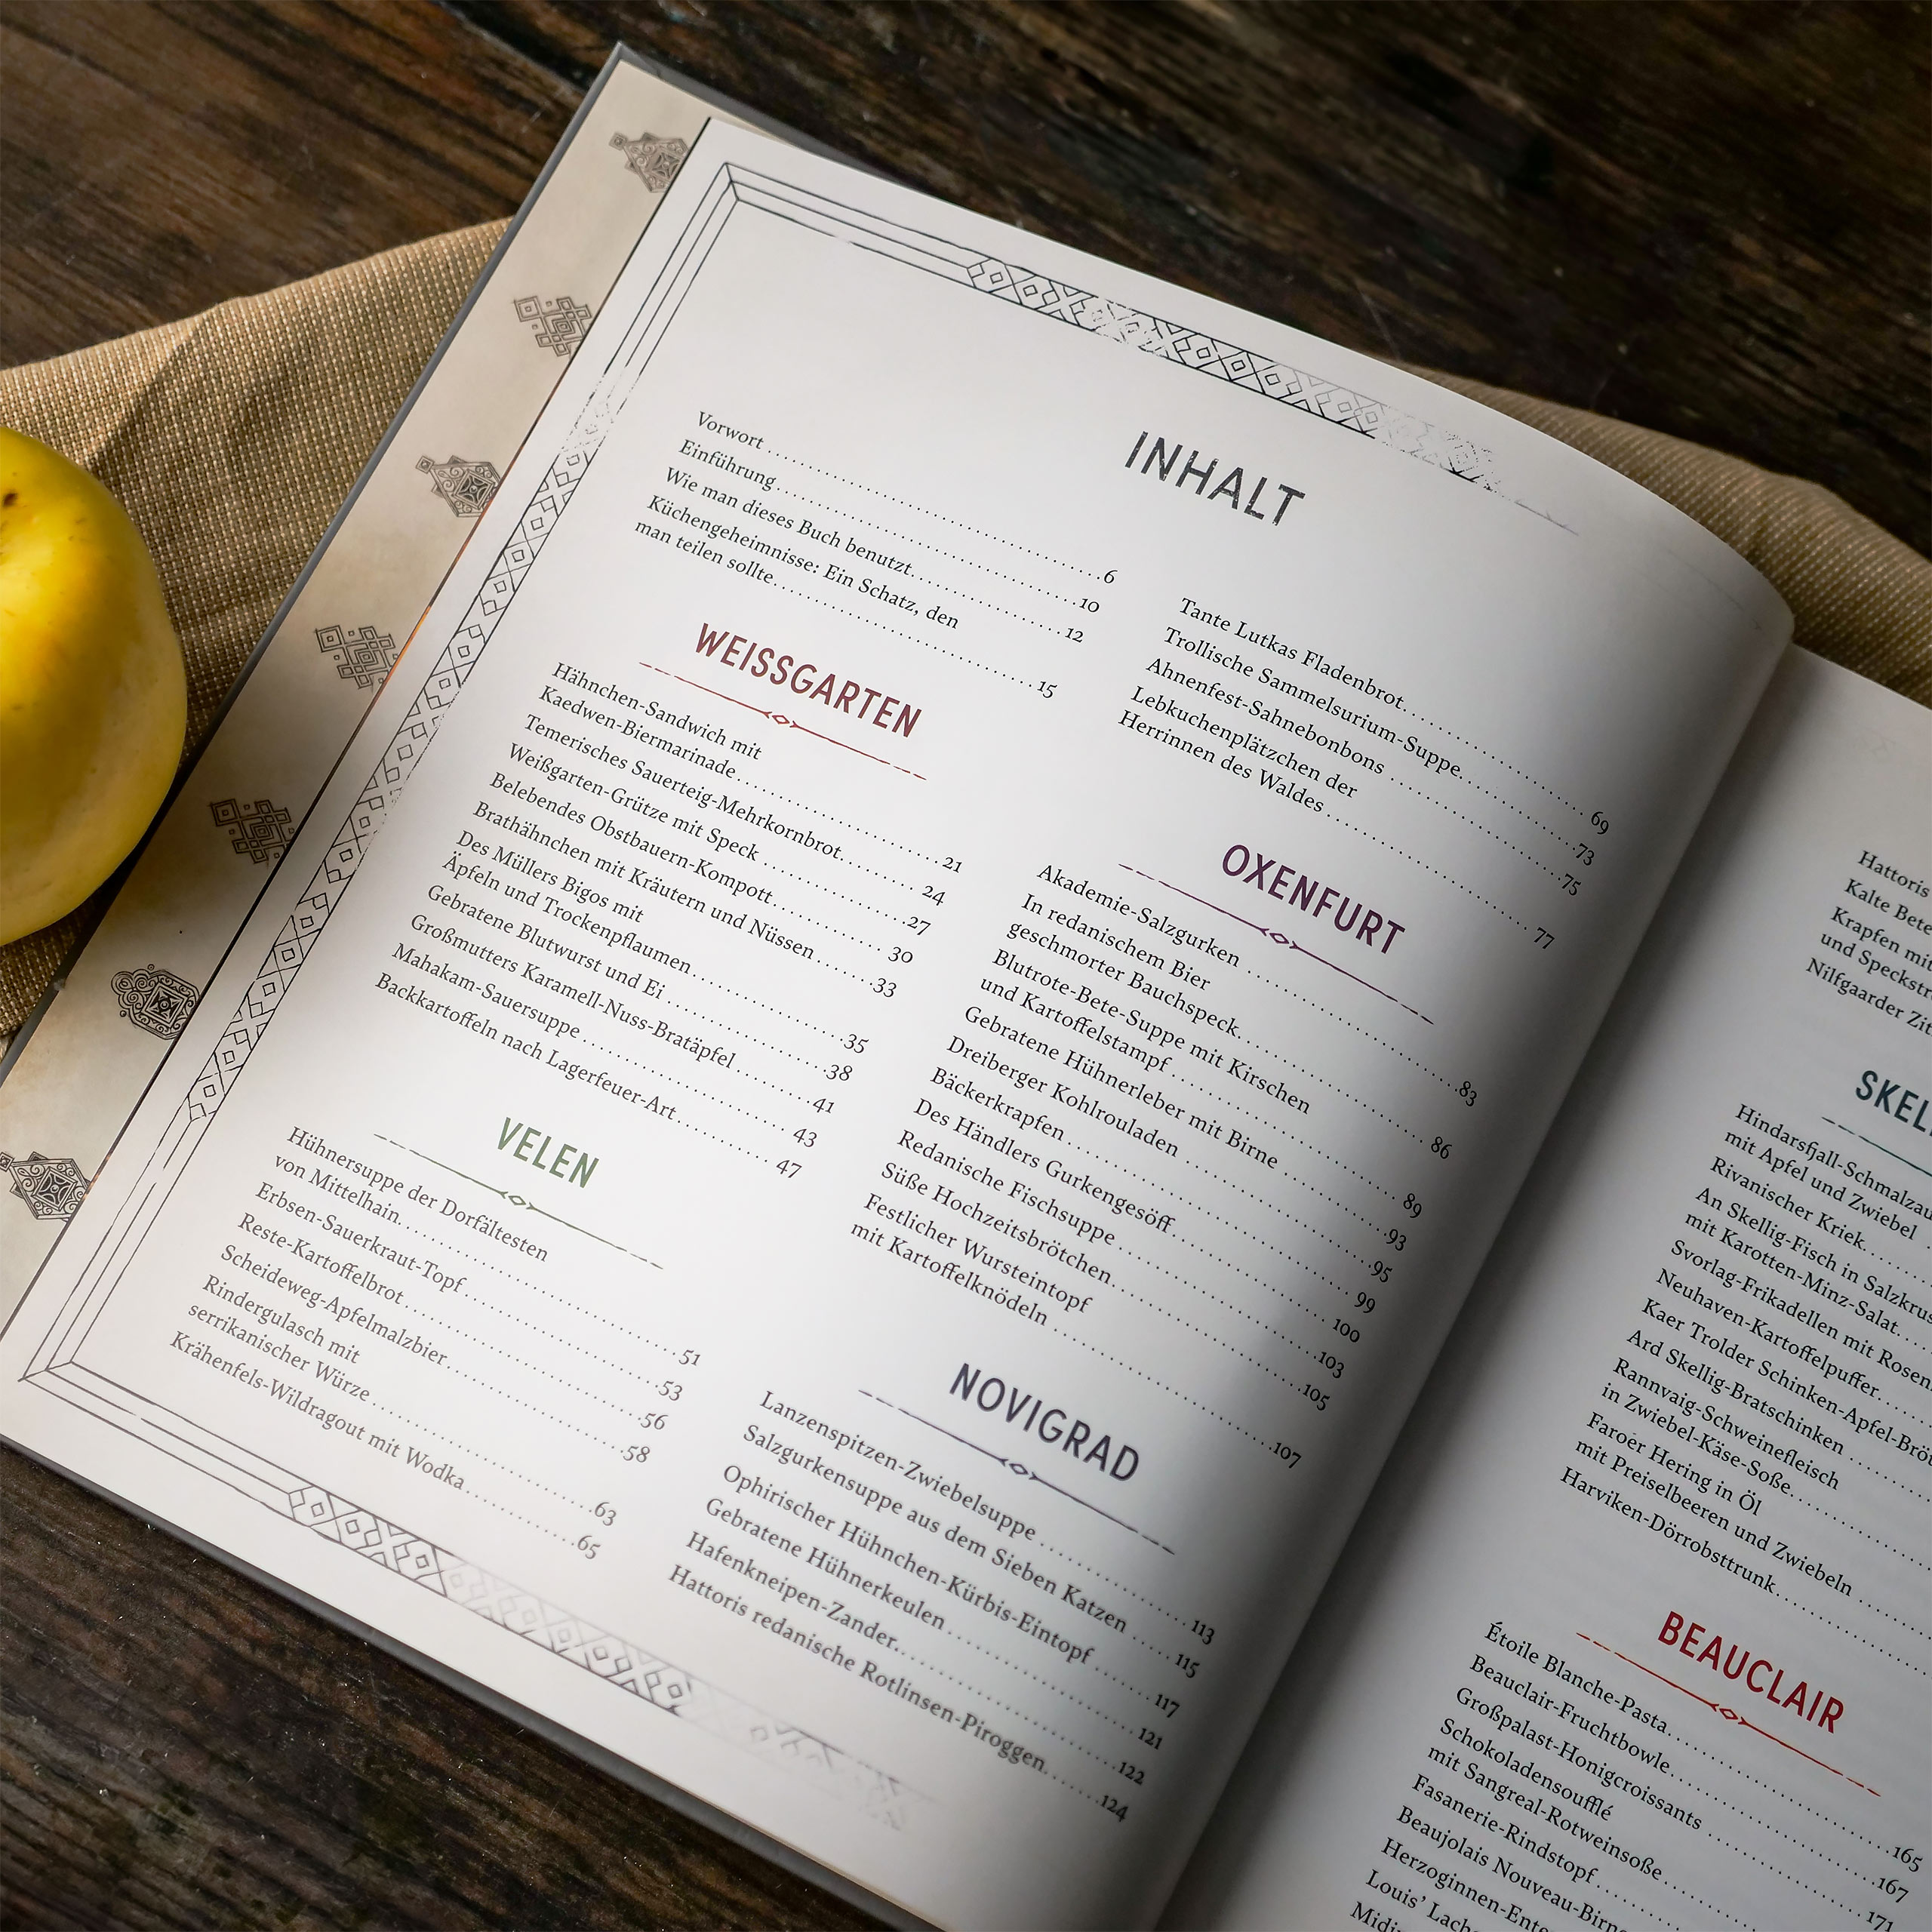 The Witcher - The Official Cookbook